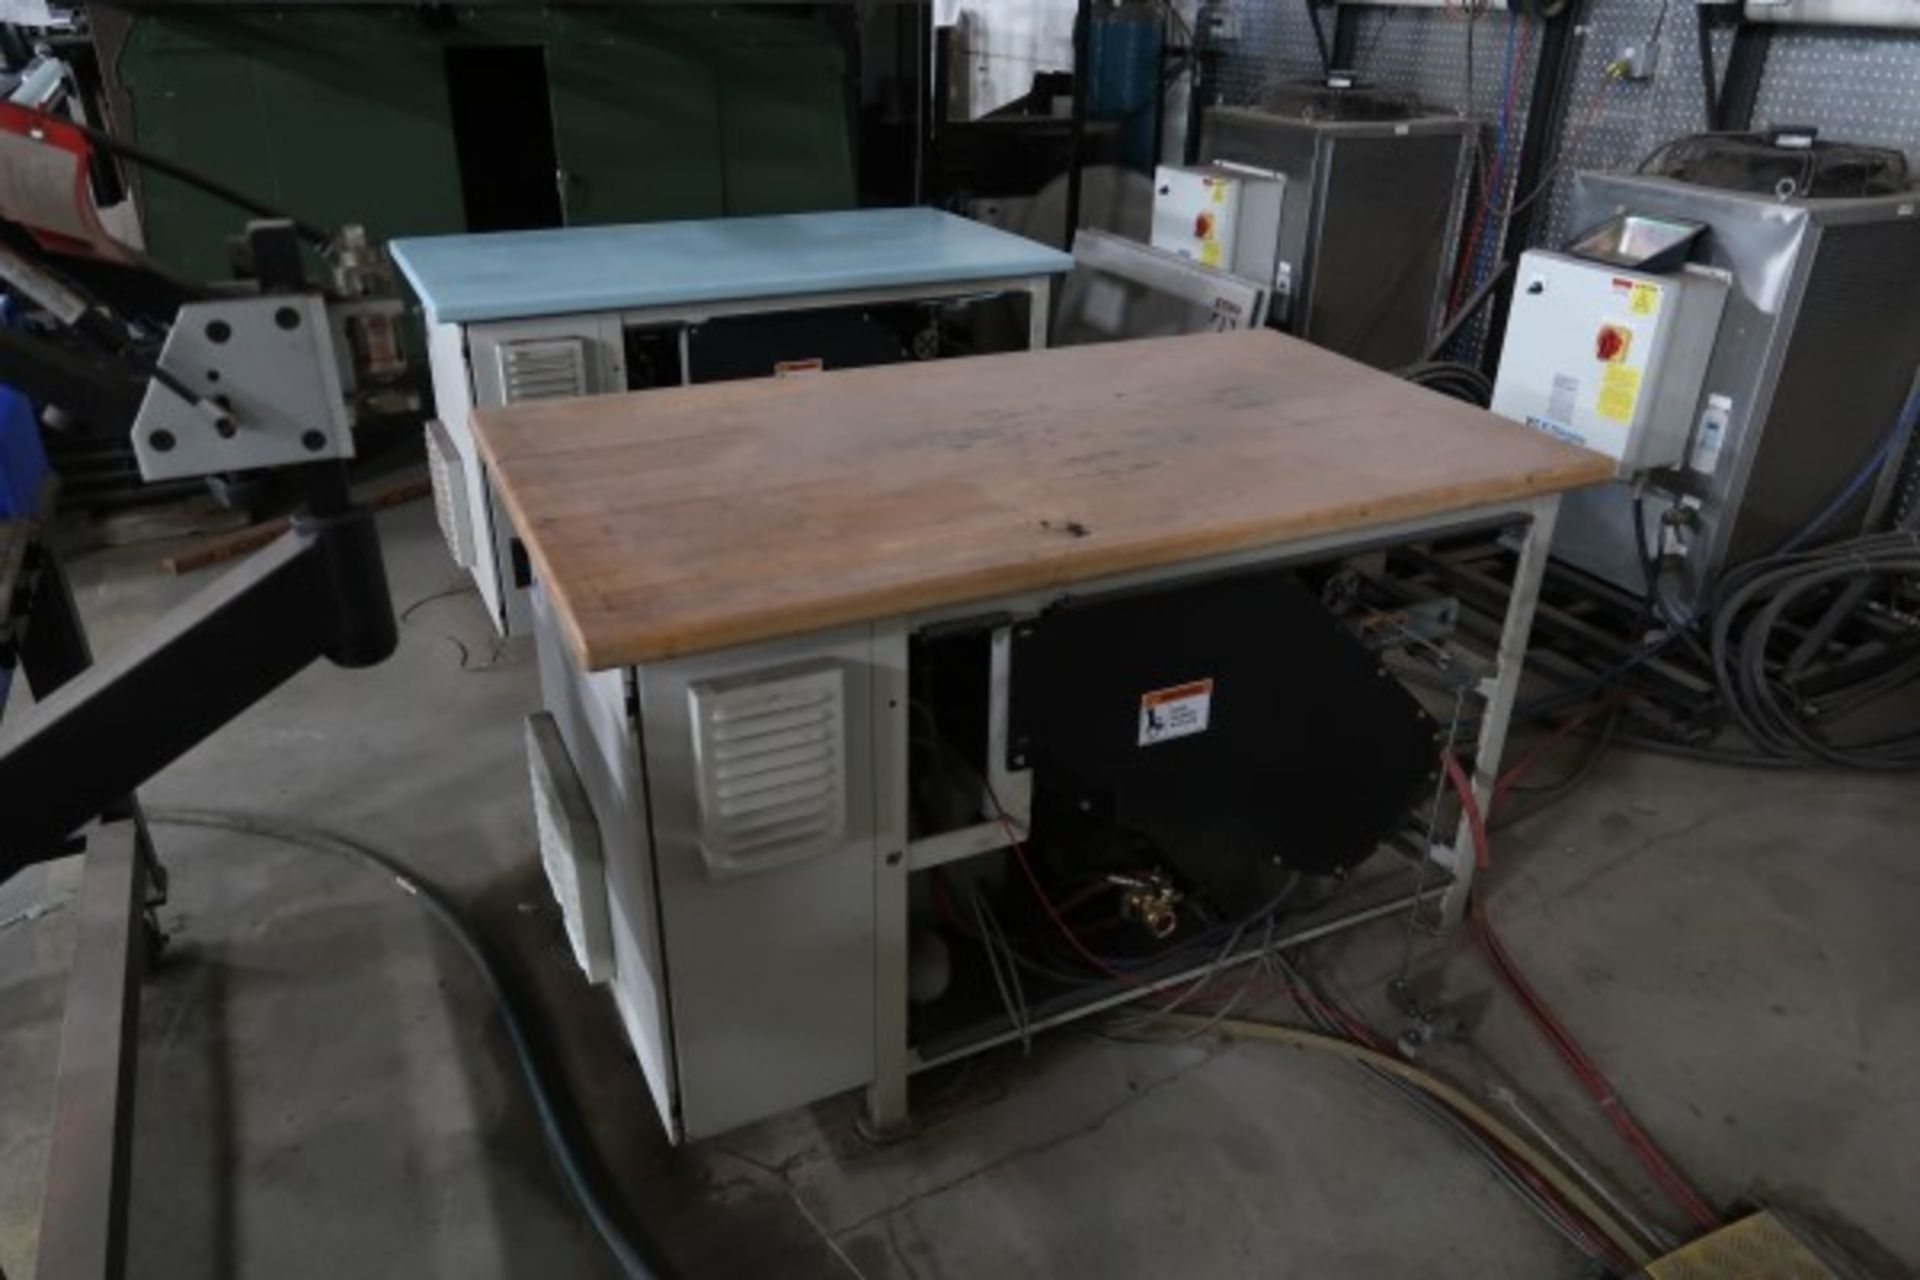 2008 OMAX WATER JET CUTTING TABLE, MODEL 80160, S/N E511753, 80” X 160” CUTTING SURFACE, - Image 5 of 22